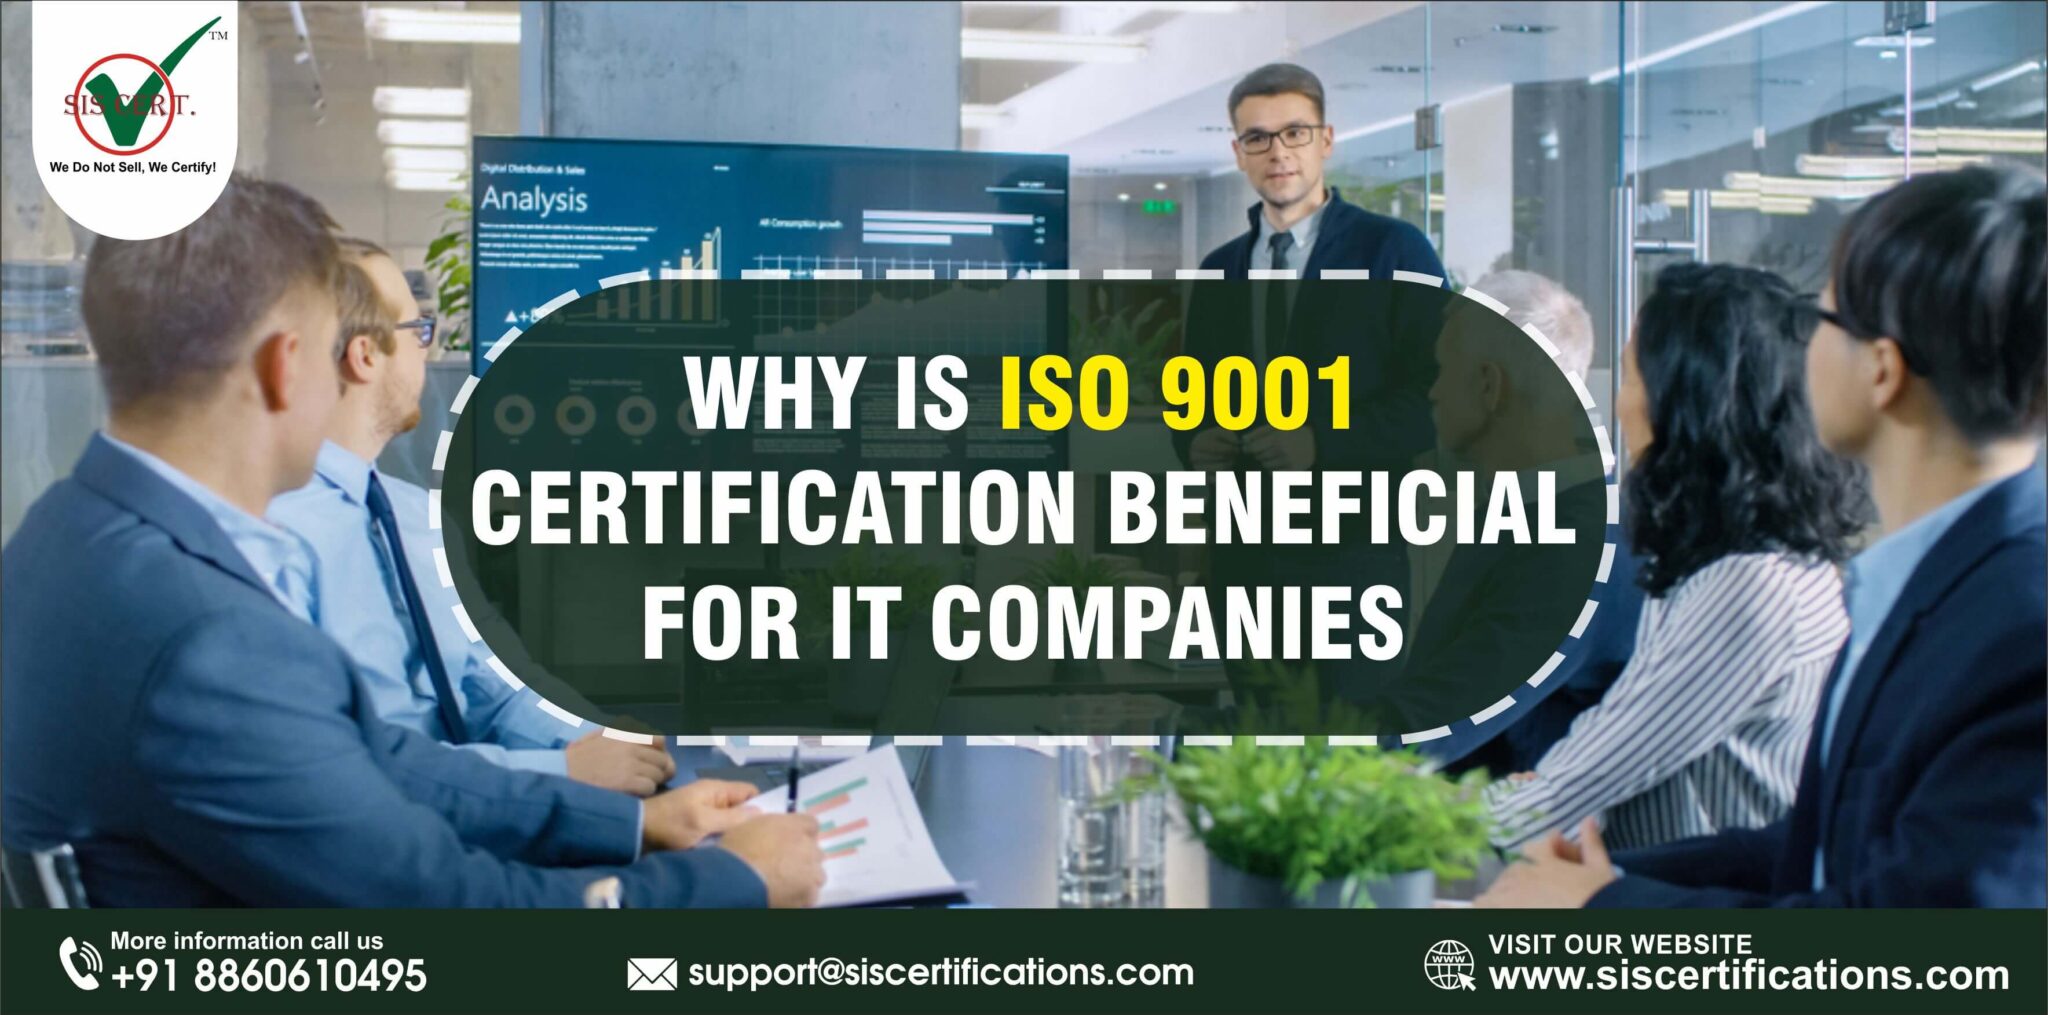 Why is ISO 9001 Certification beneficial for IT companies?